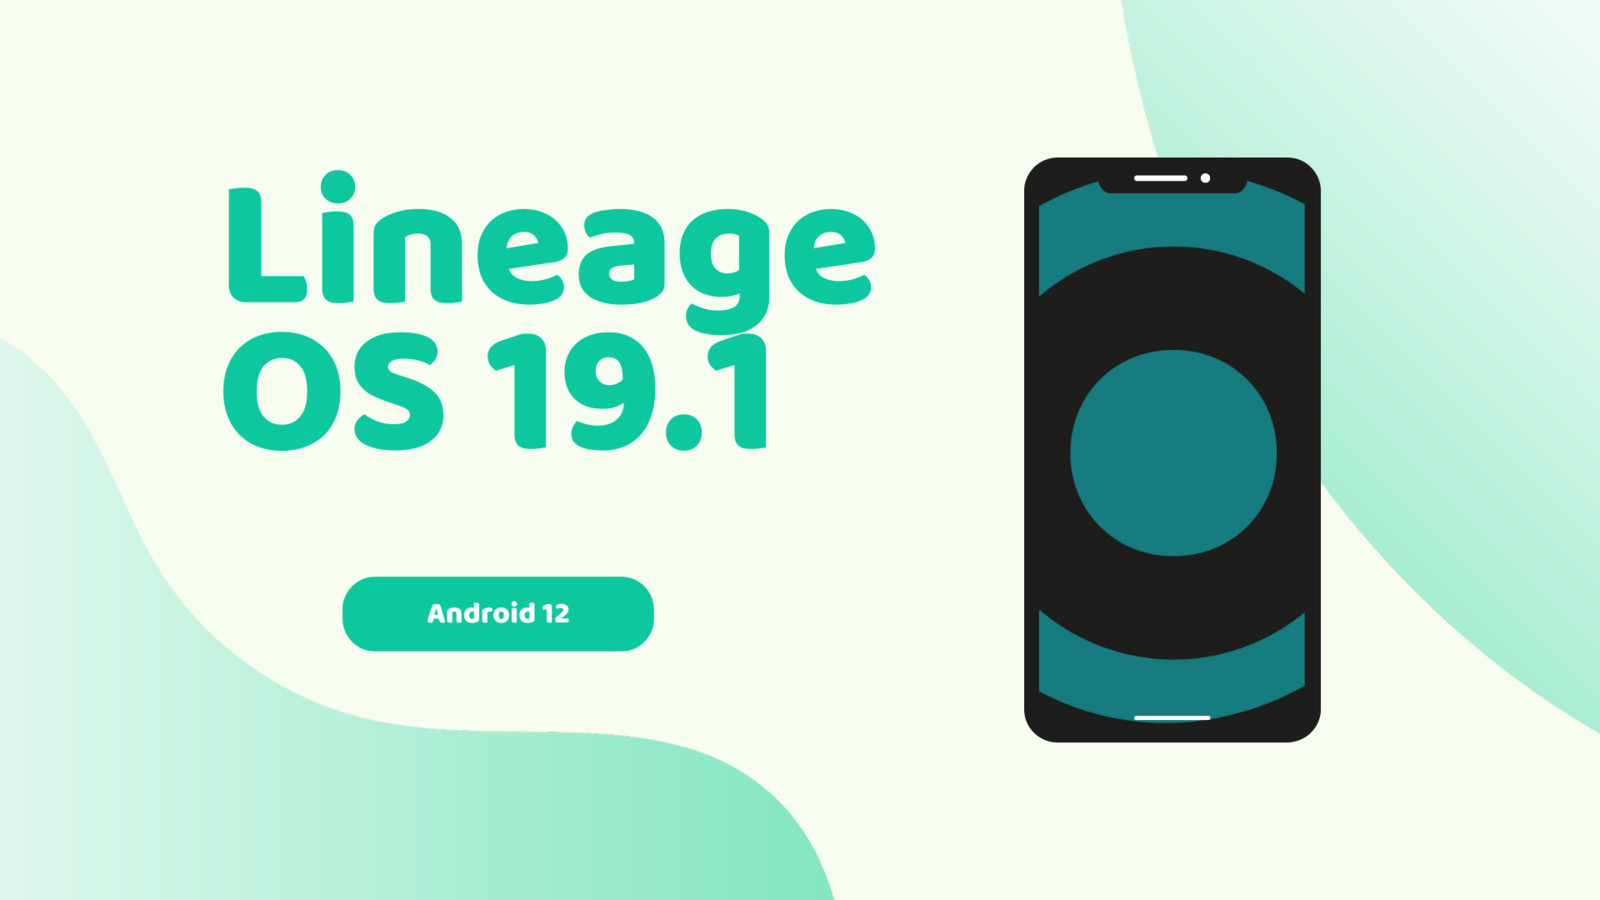 Download Lineage OS 19.1 based on Anroid 12.1